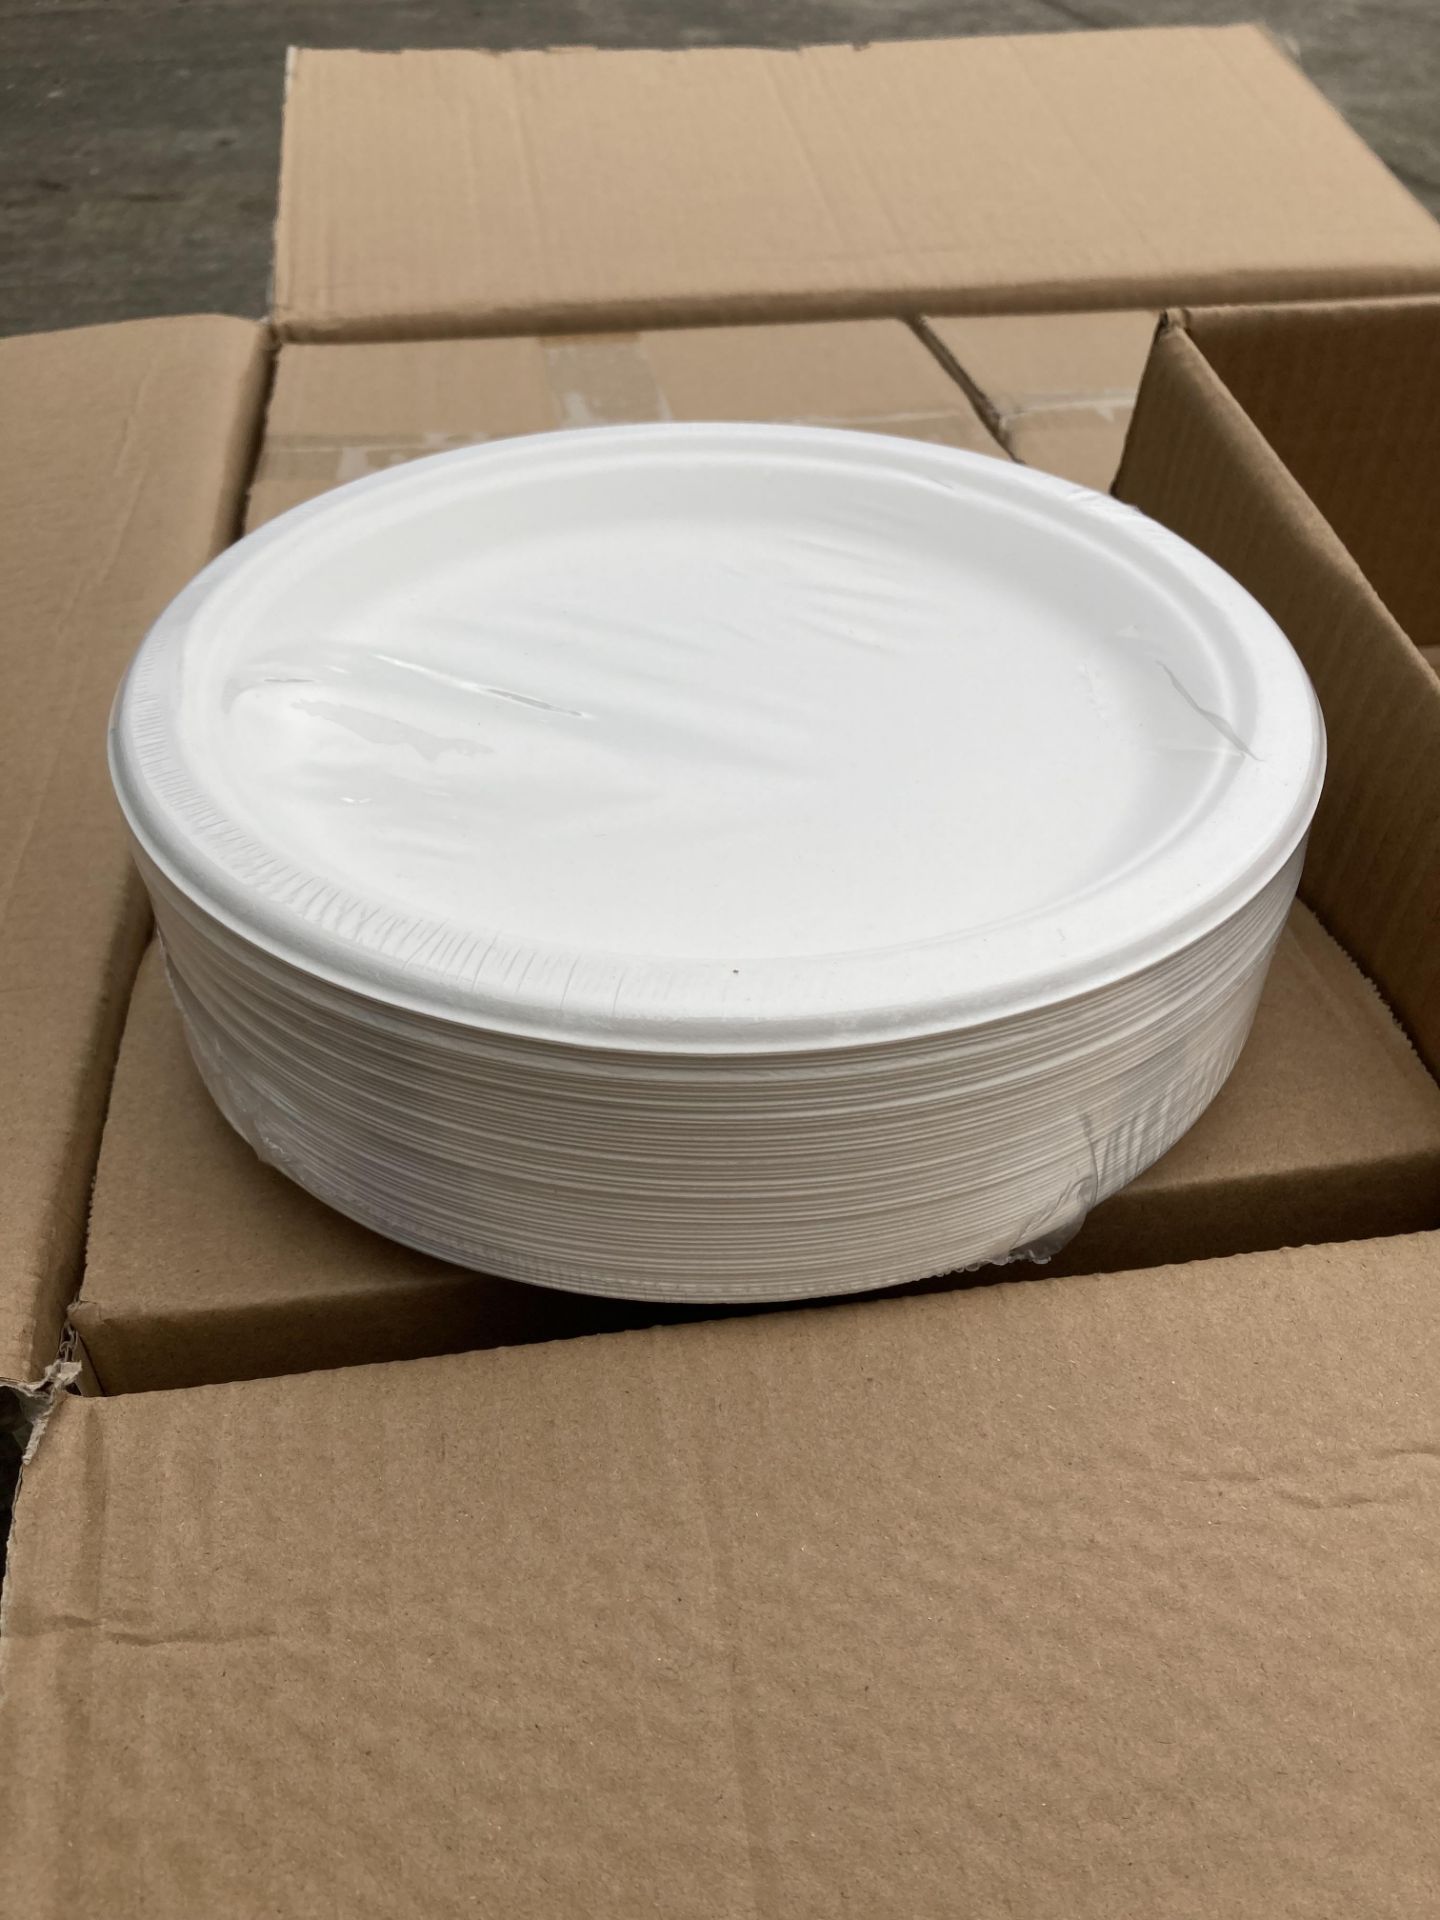 60 x Boxes of approximately 100 x Wooden Cutlery and Paper Plates (4 x outer boxes) (saleroom - Image 3 of 3